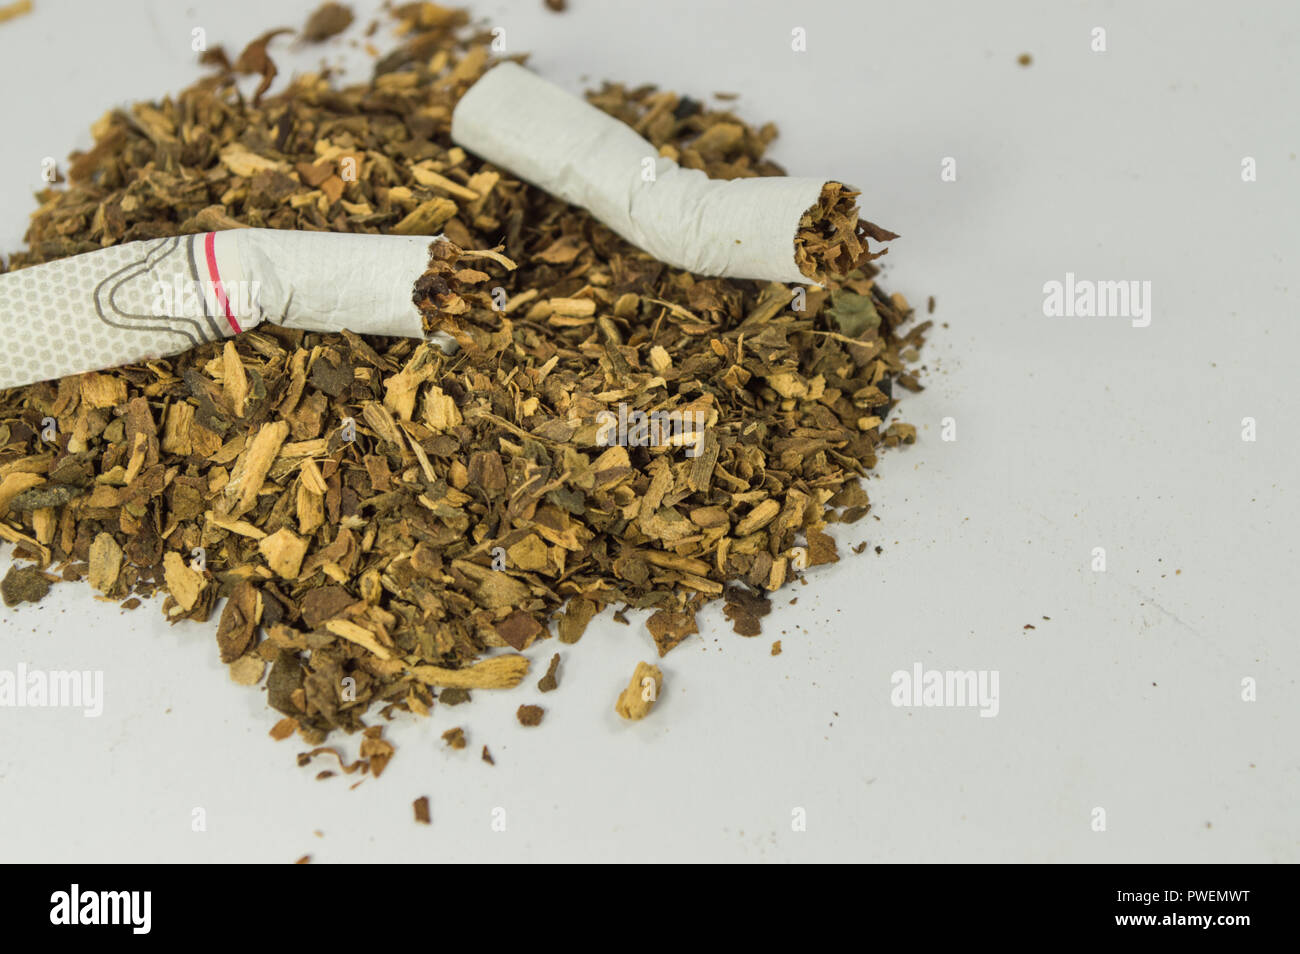 Cigarette on loose shredded tobacco, close up. Stock Photo